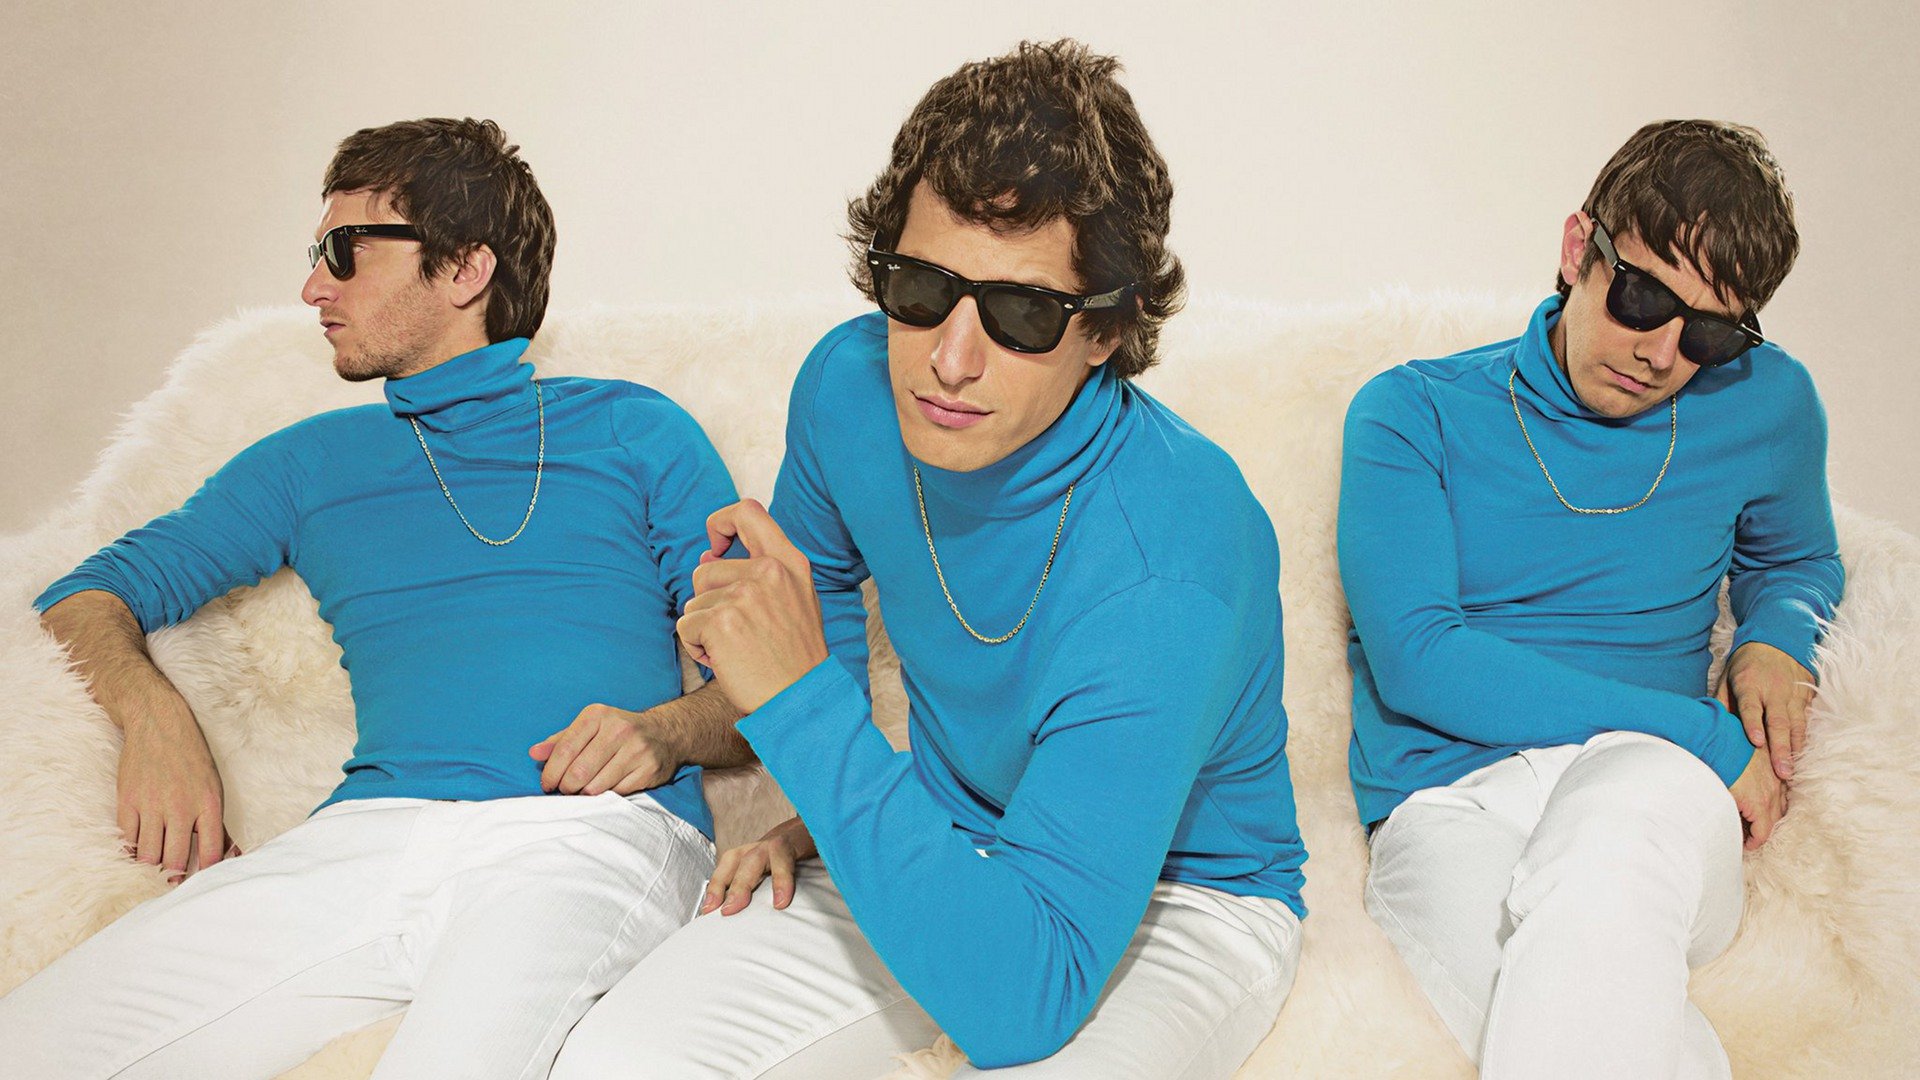 15 Life Lessons from The Lonely Island